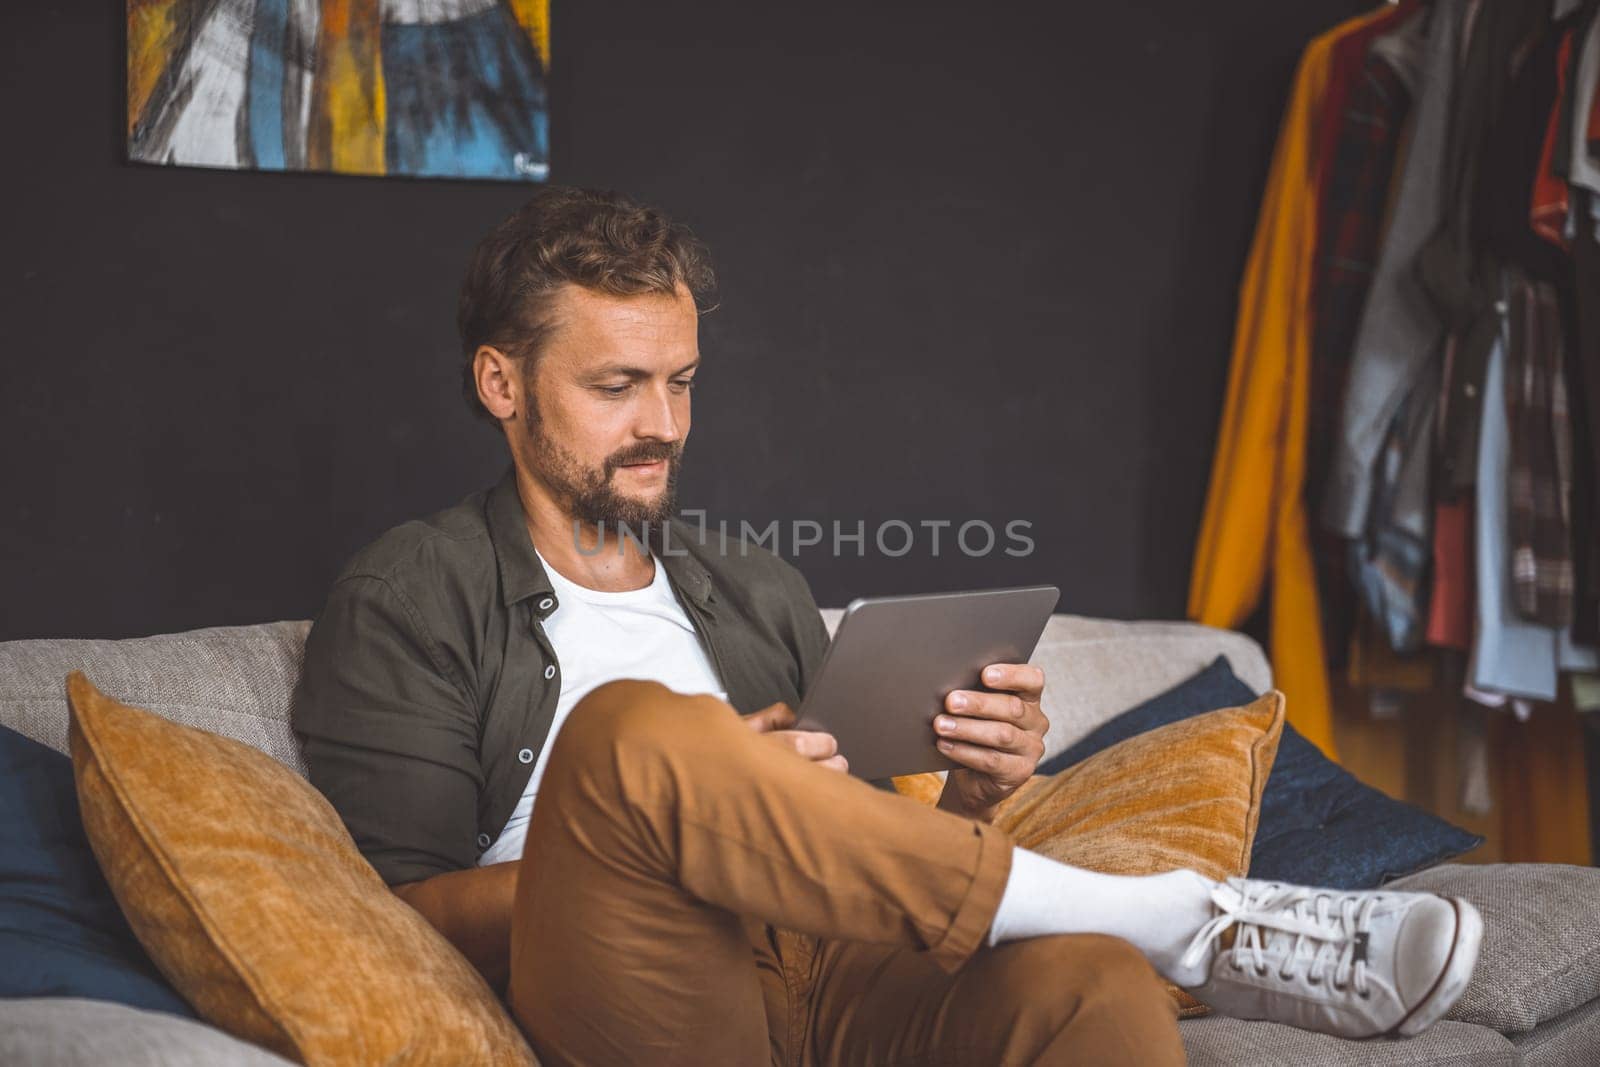 Happy man home, focused on tablet PC. Emphasis is on digital device, representing ubiquity of technology in modern life. Man's positive and upbeat demeanor reflects sense of joy and satisfaction, conveying the importance of taking breaks and enjoying leisure time. High quality photo